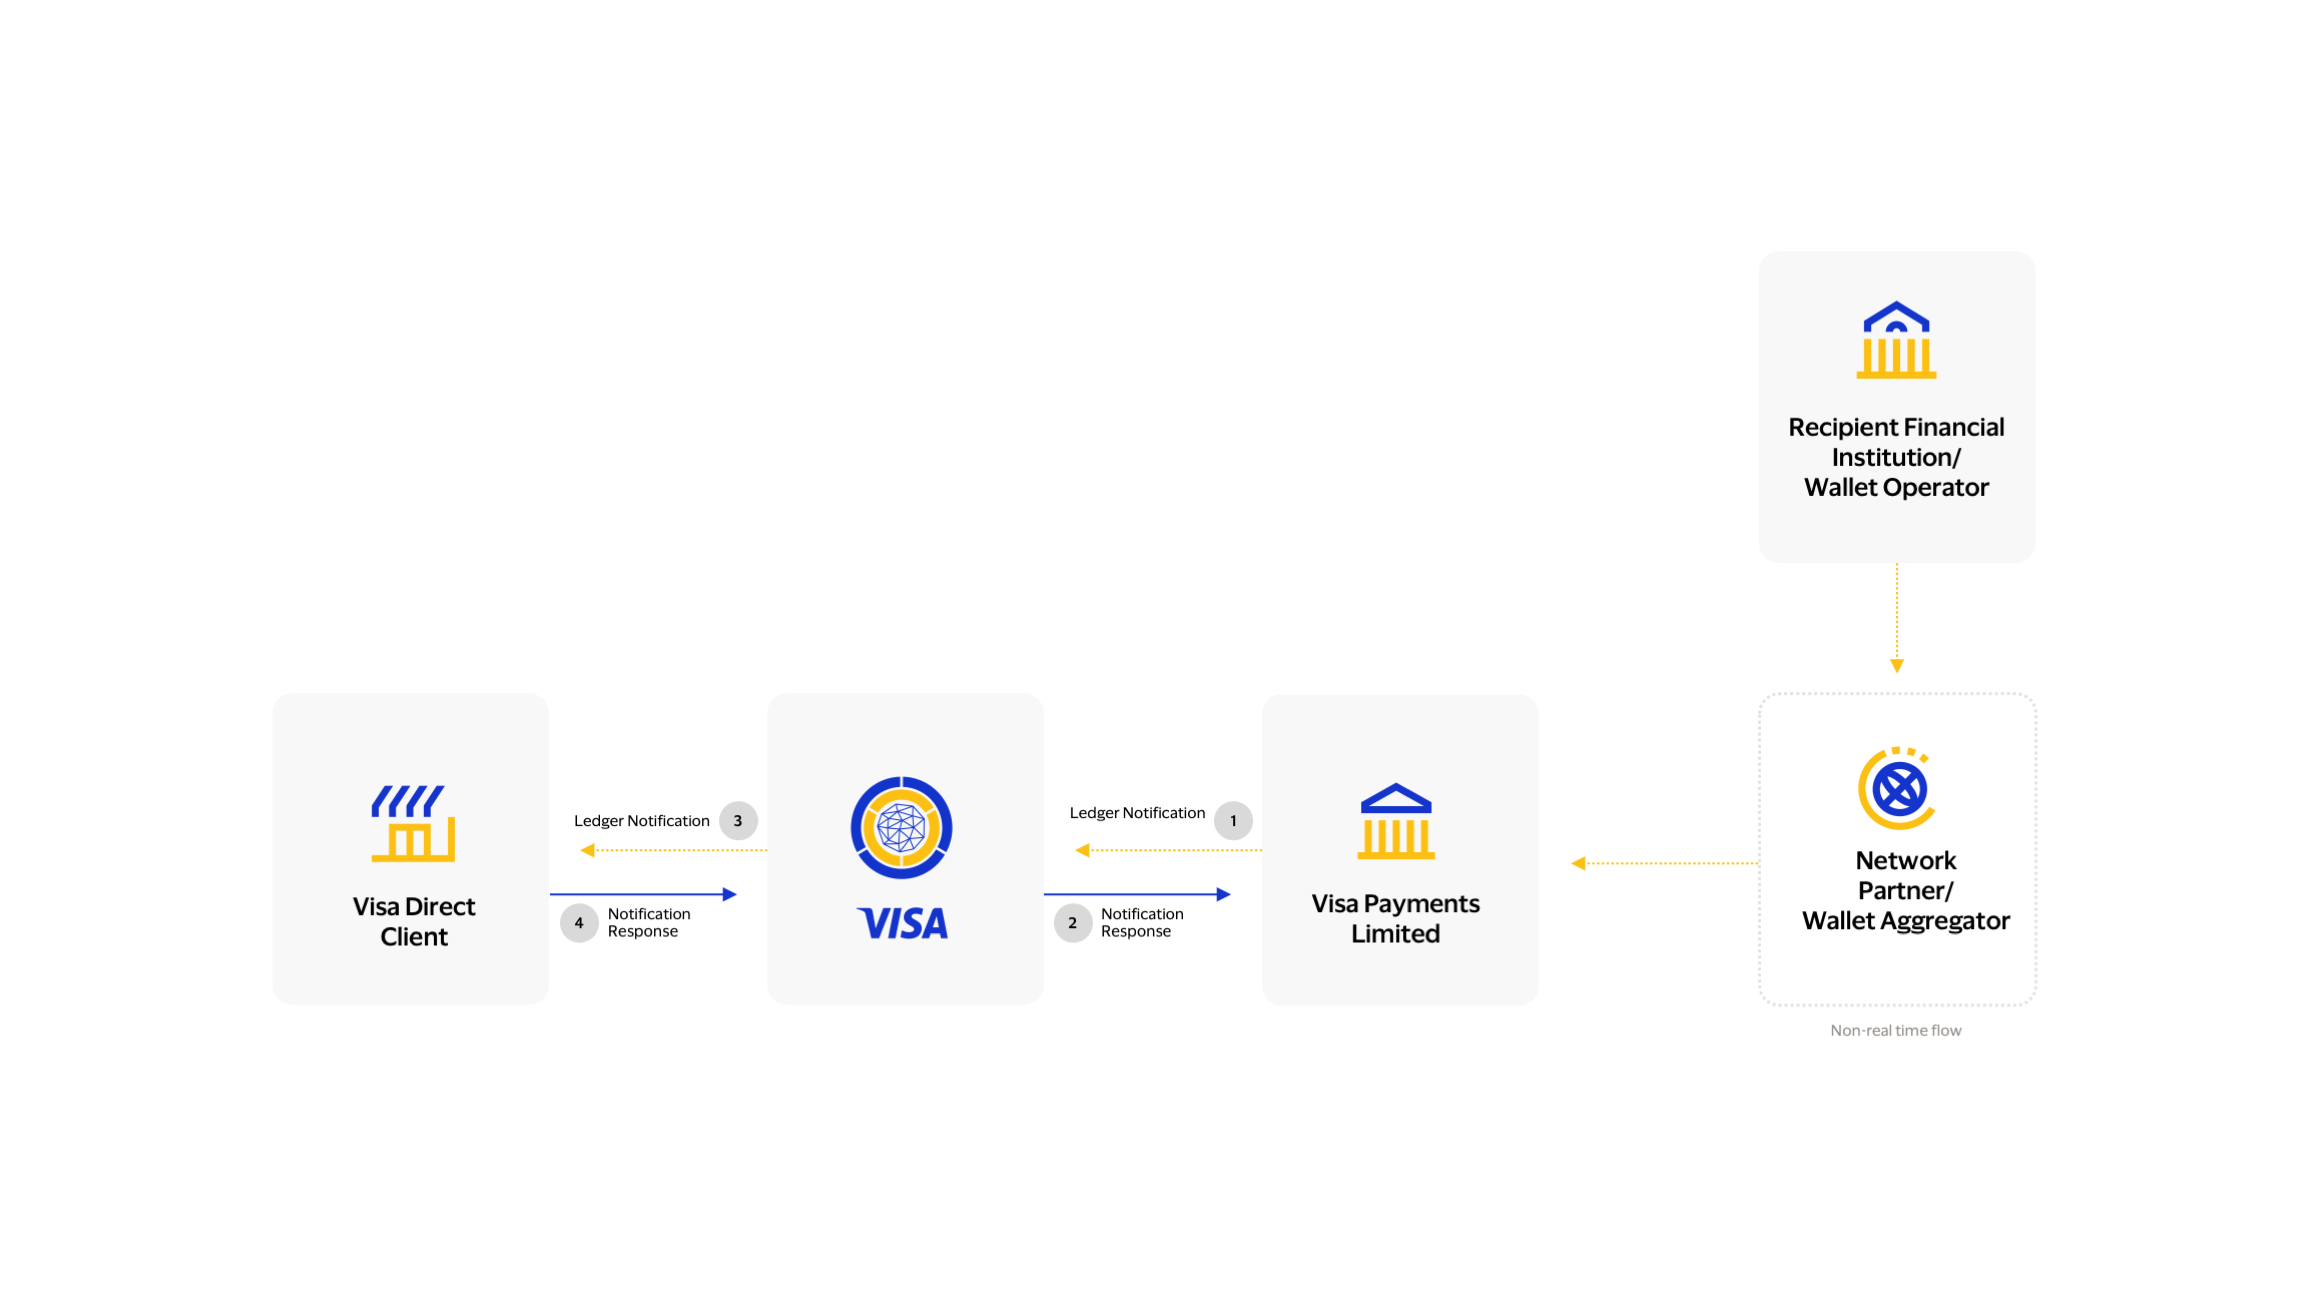 This image explains the transaction flow of Ledger Notification API under Visa Direct Account and Wallet APIs.